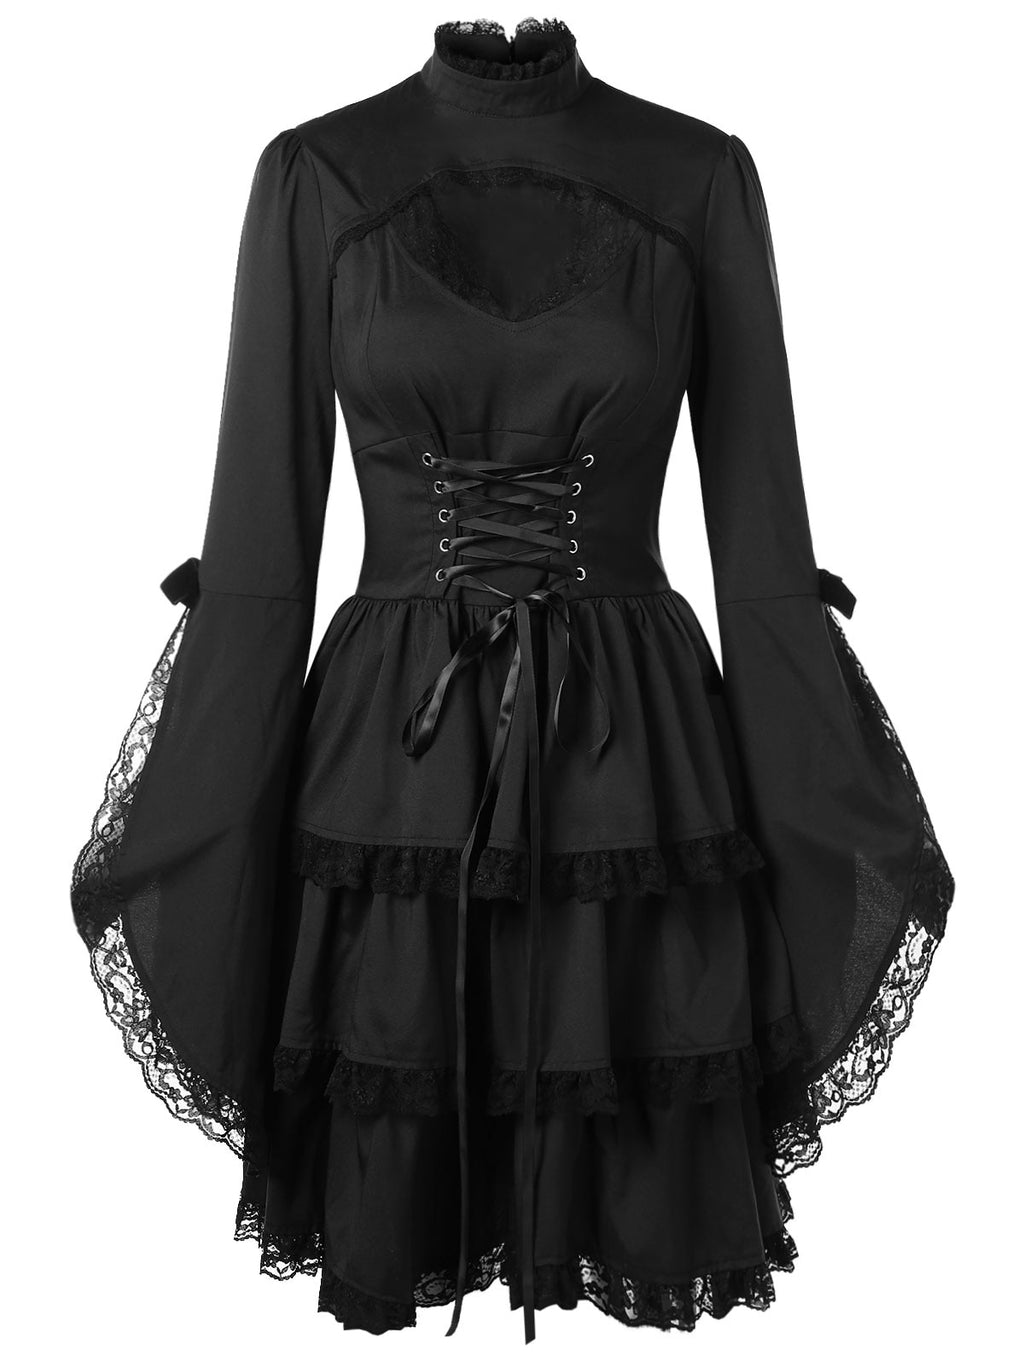 The Basic Witch Dress - Goth Mall